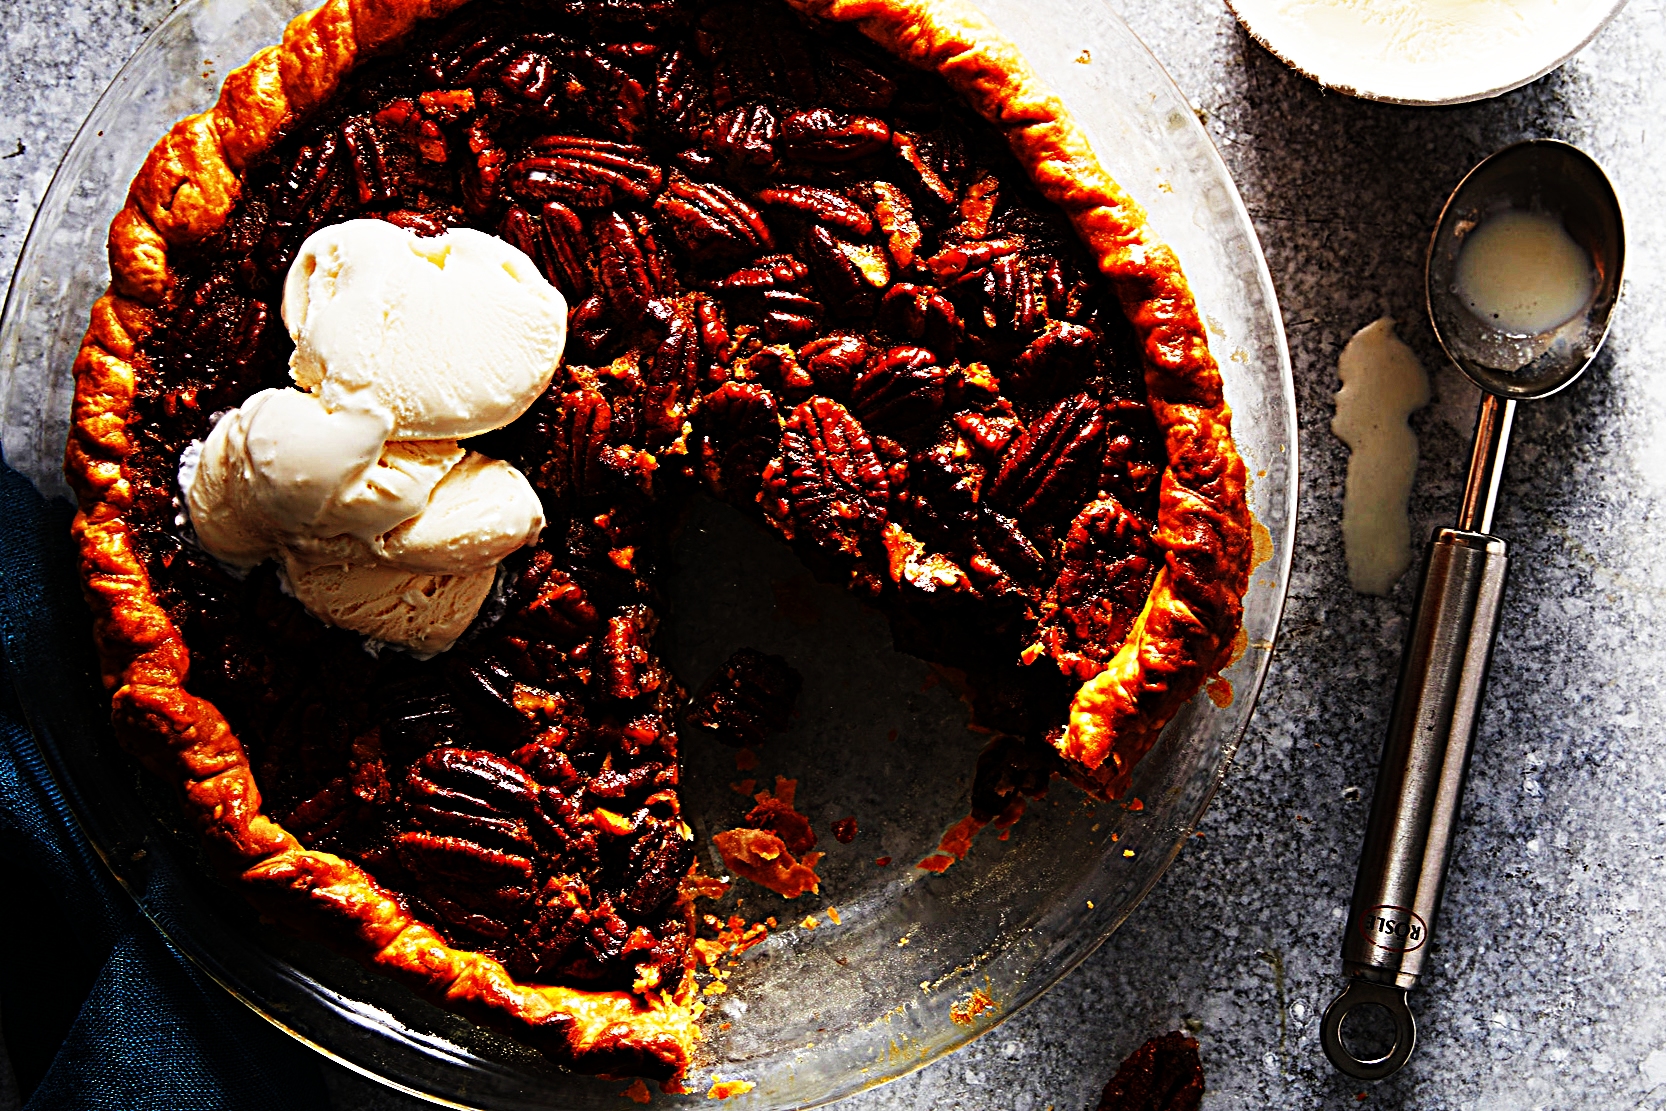 Stupid-Easy Recipe for Pecan Pie (#1 Top-Rated)